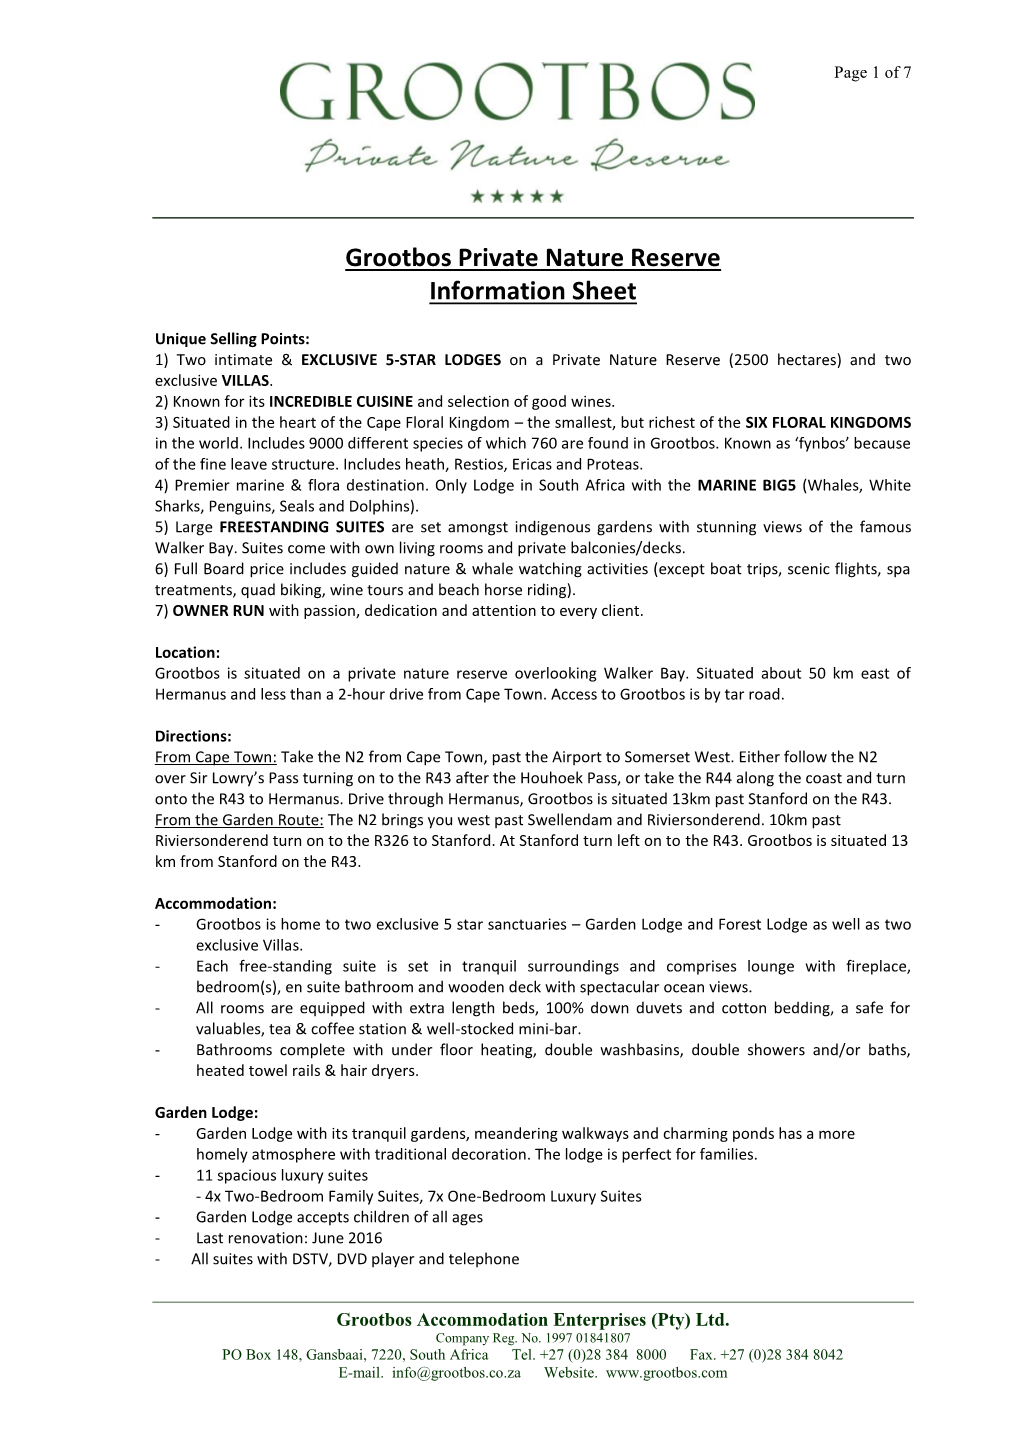 Grootbos Private Nature Reserve Information Sheet